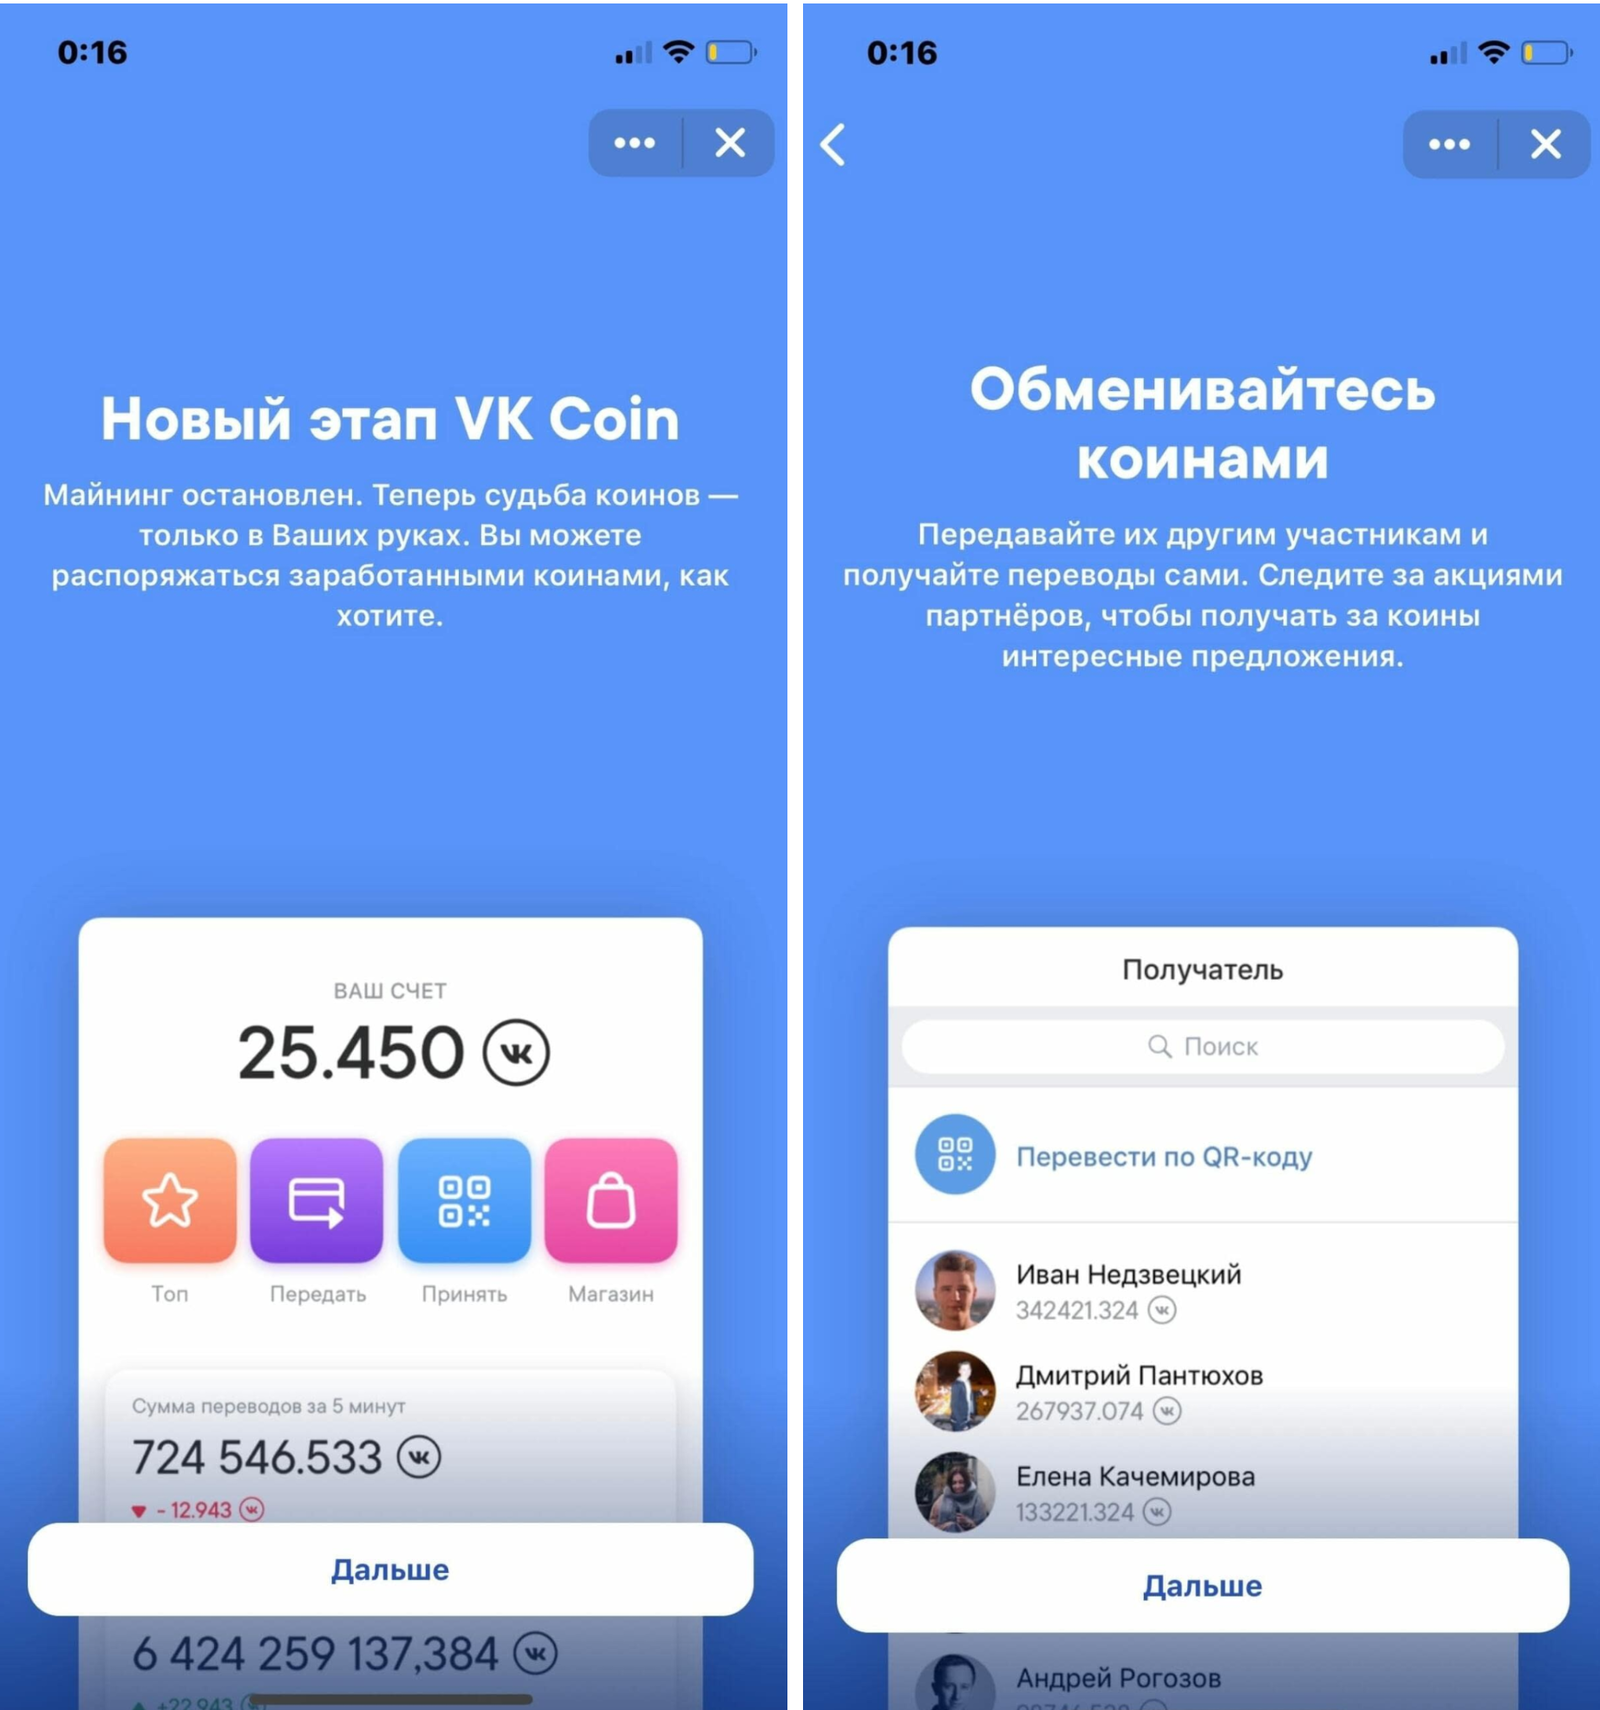 VKontakte closed the mining of the internal currency in the game VK Coin 10 days after the launch - news, In contact with, Longpost, Social networks, Test, Mining